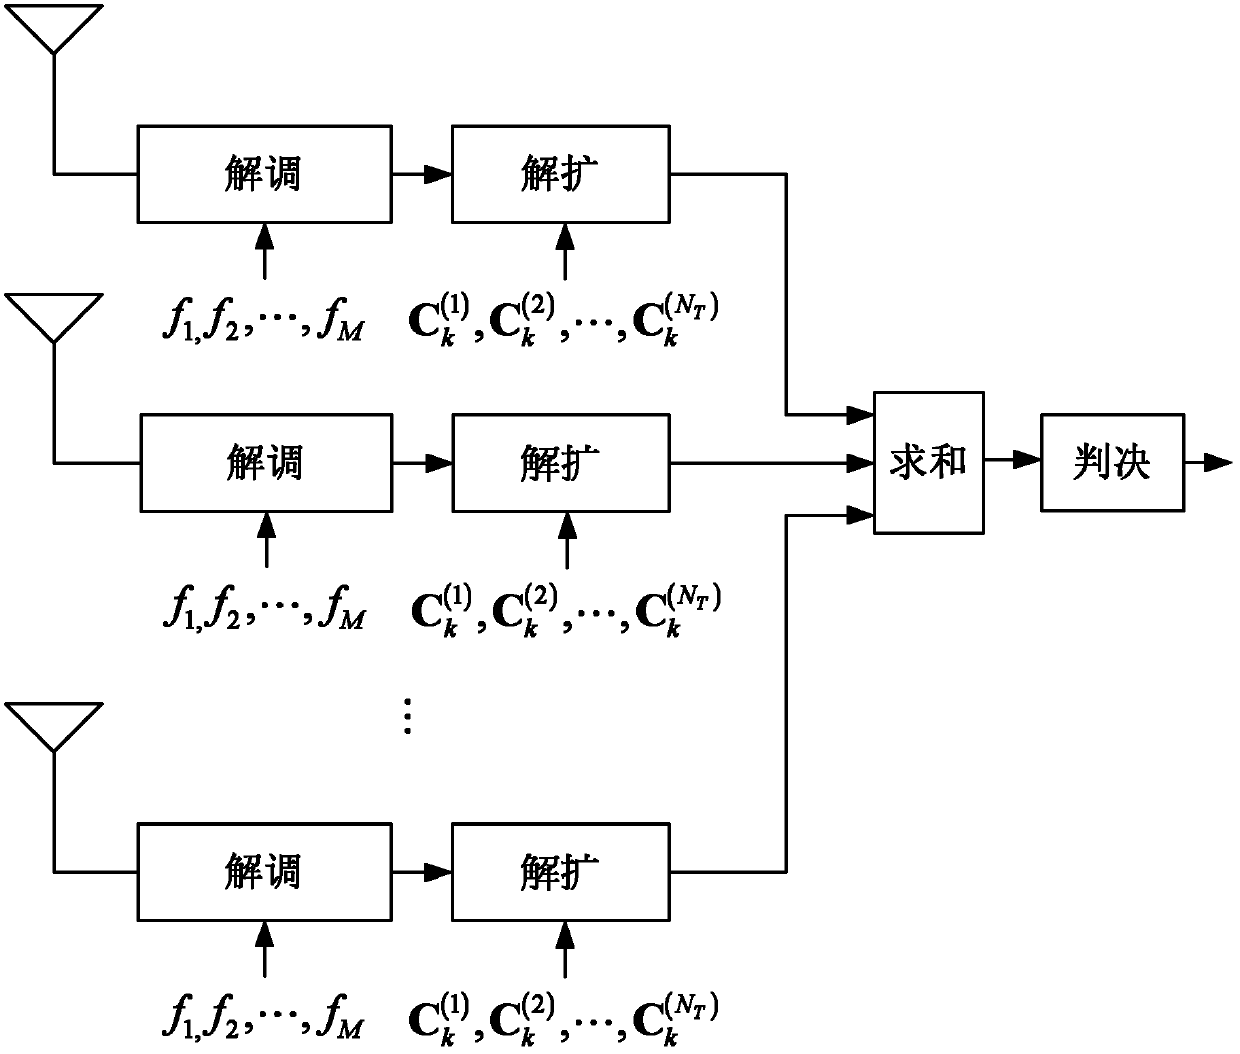 Multi-carrier MIMO (multiple input multiple output) system based on chip-level spread spectrum code of space-time-frequency three-dimensional complementary code